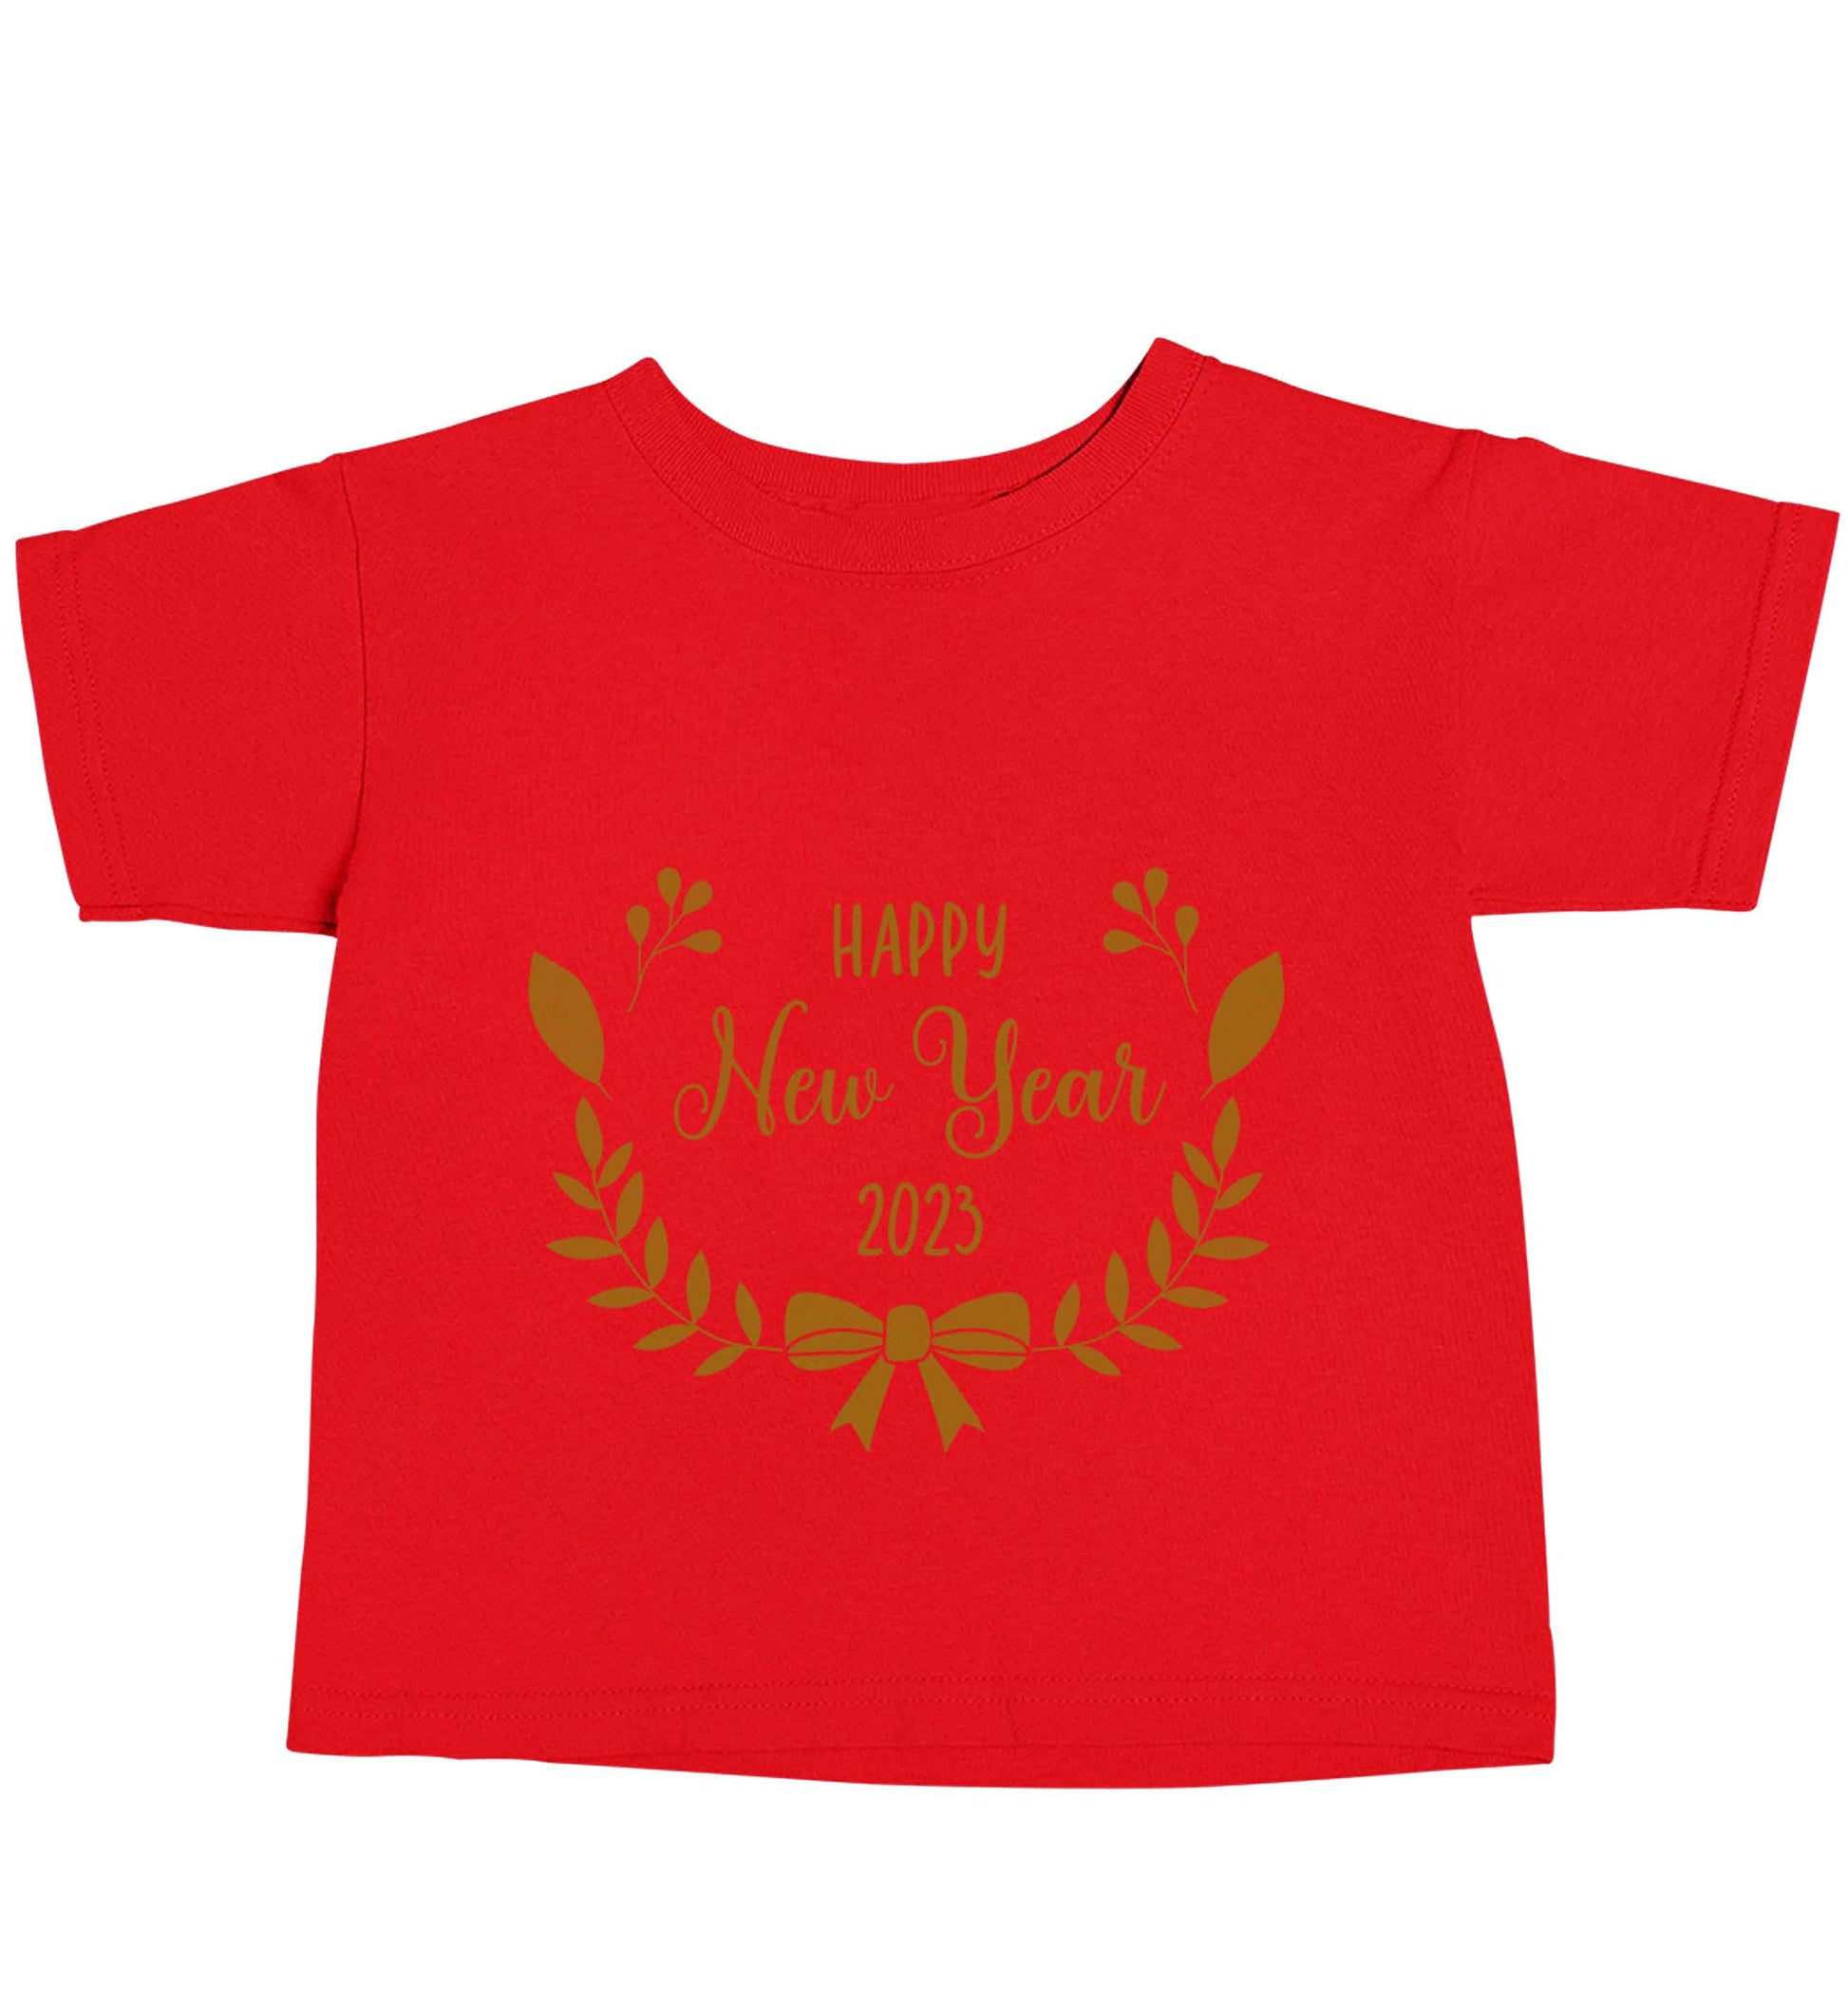 Happy New Year 2023 red baby toddler Tshirt 2 Years